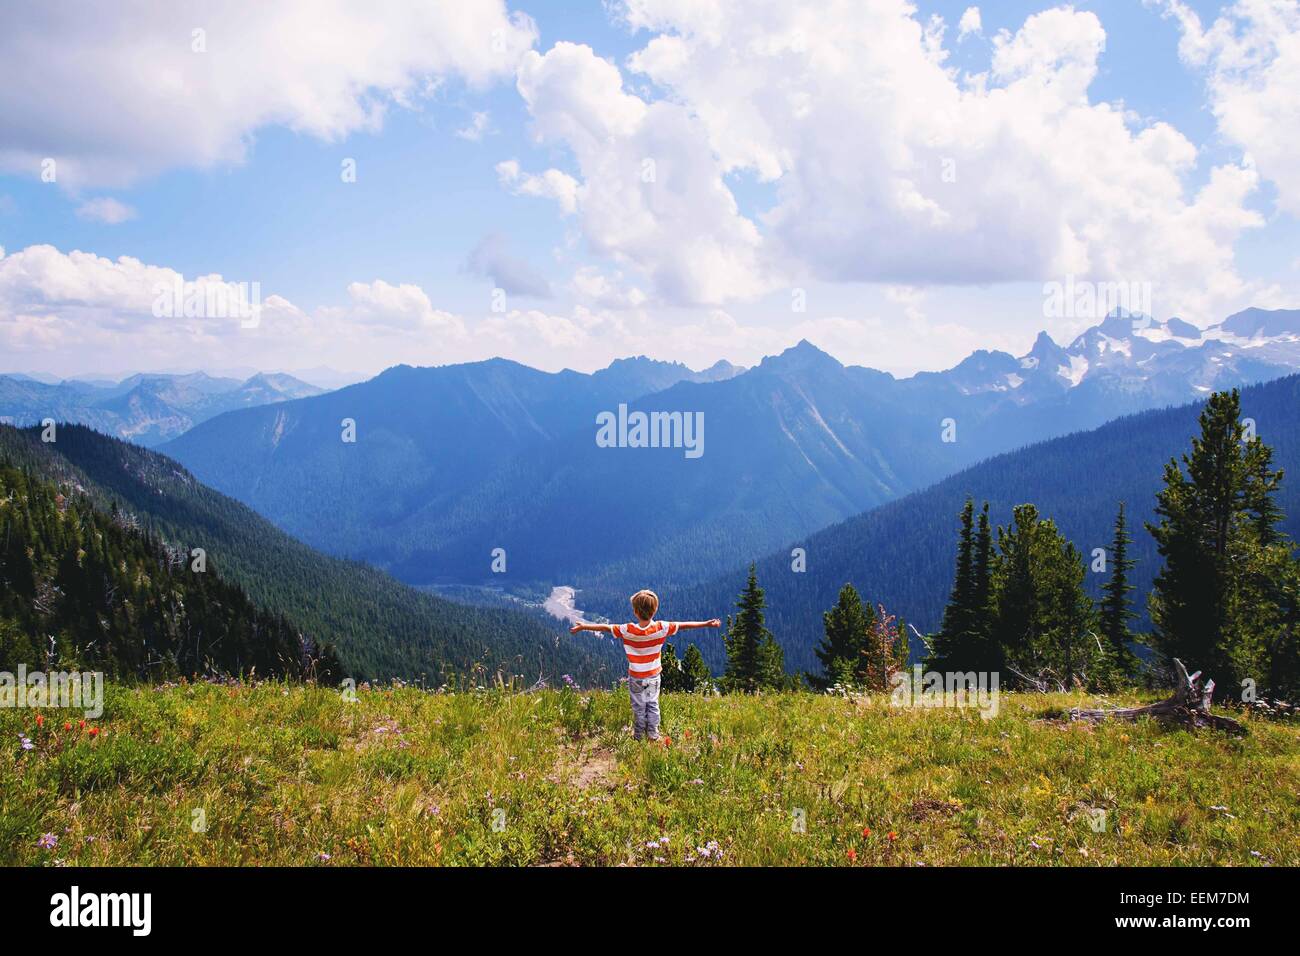 Boy standing in mountains with his arms outstretched Stock Photo